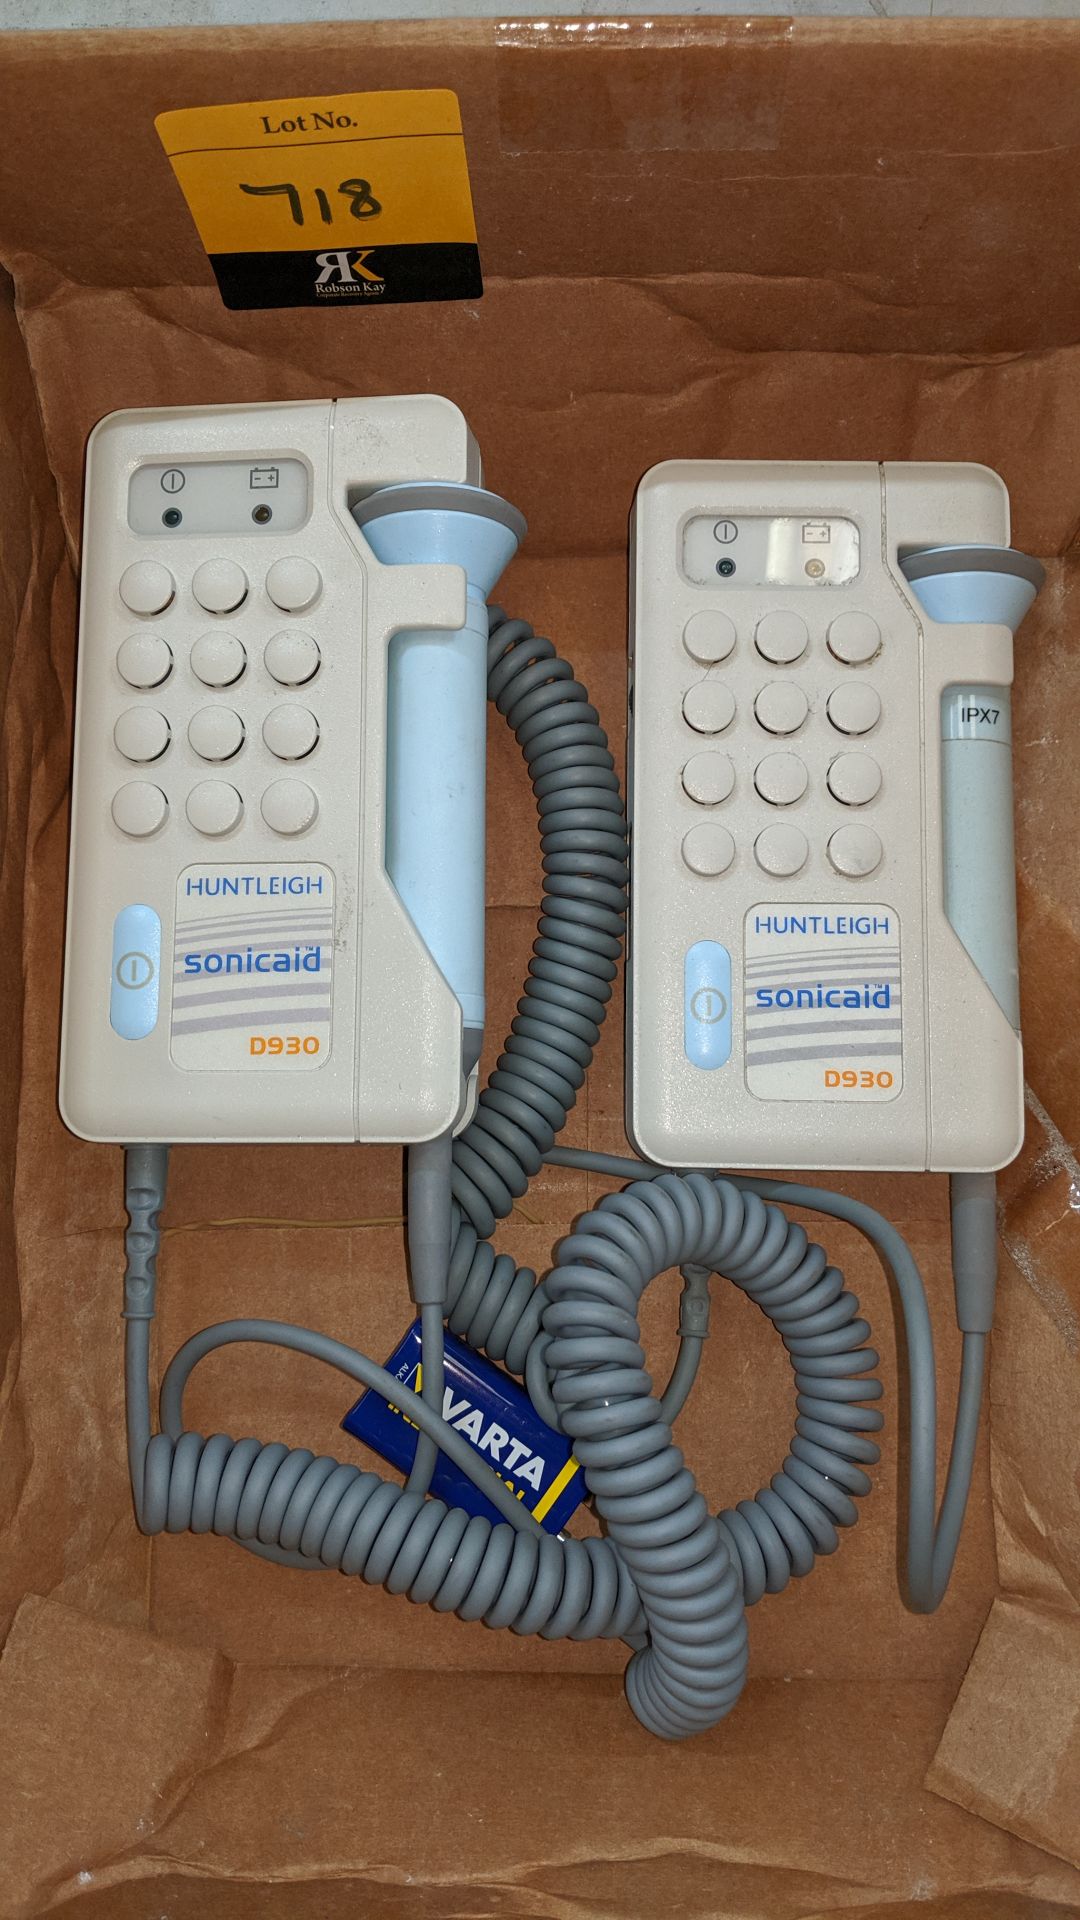 2 off Huntleigh Sonicaid D930 Fetal Doppler testers - in a box marked as being faulty. This is one - Image 3 of 4